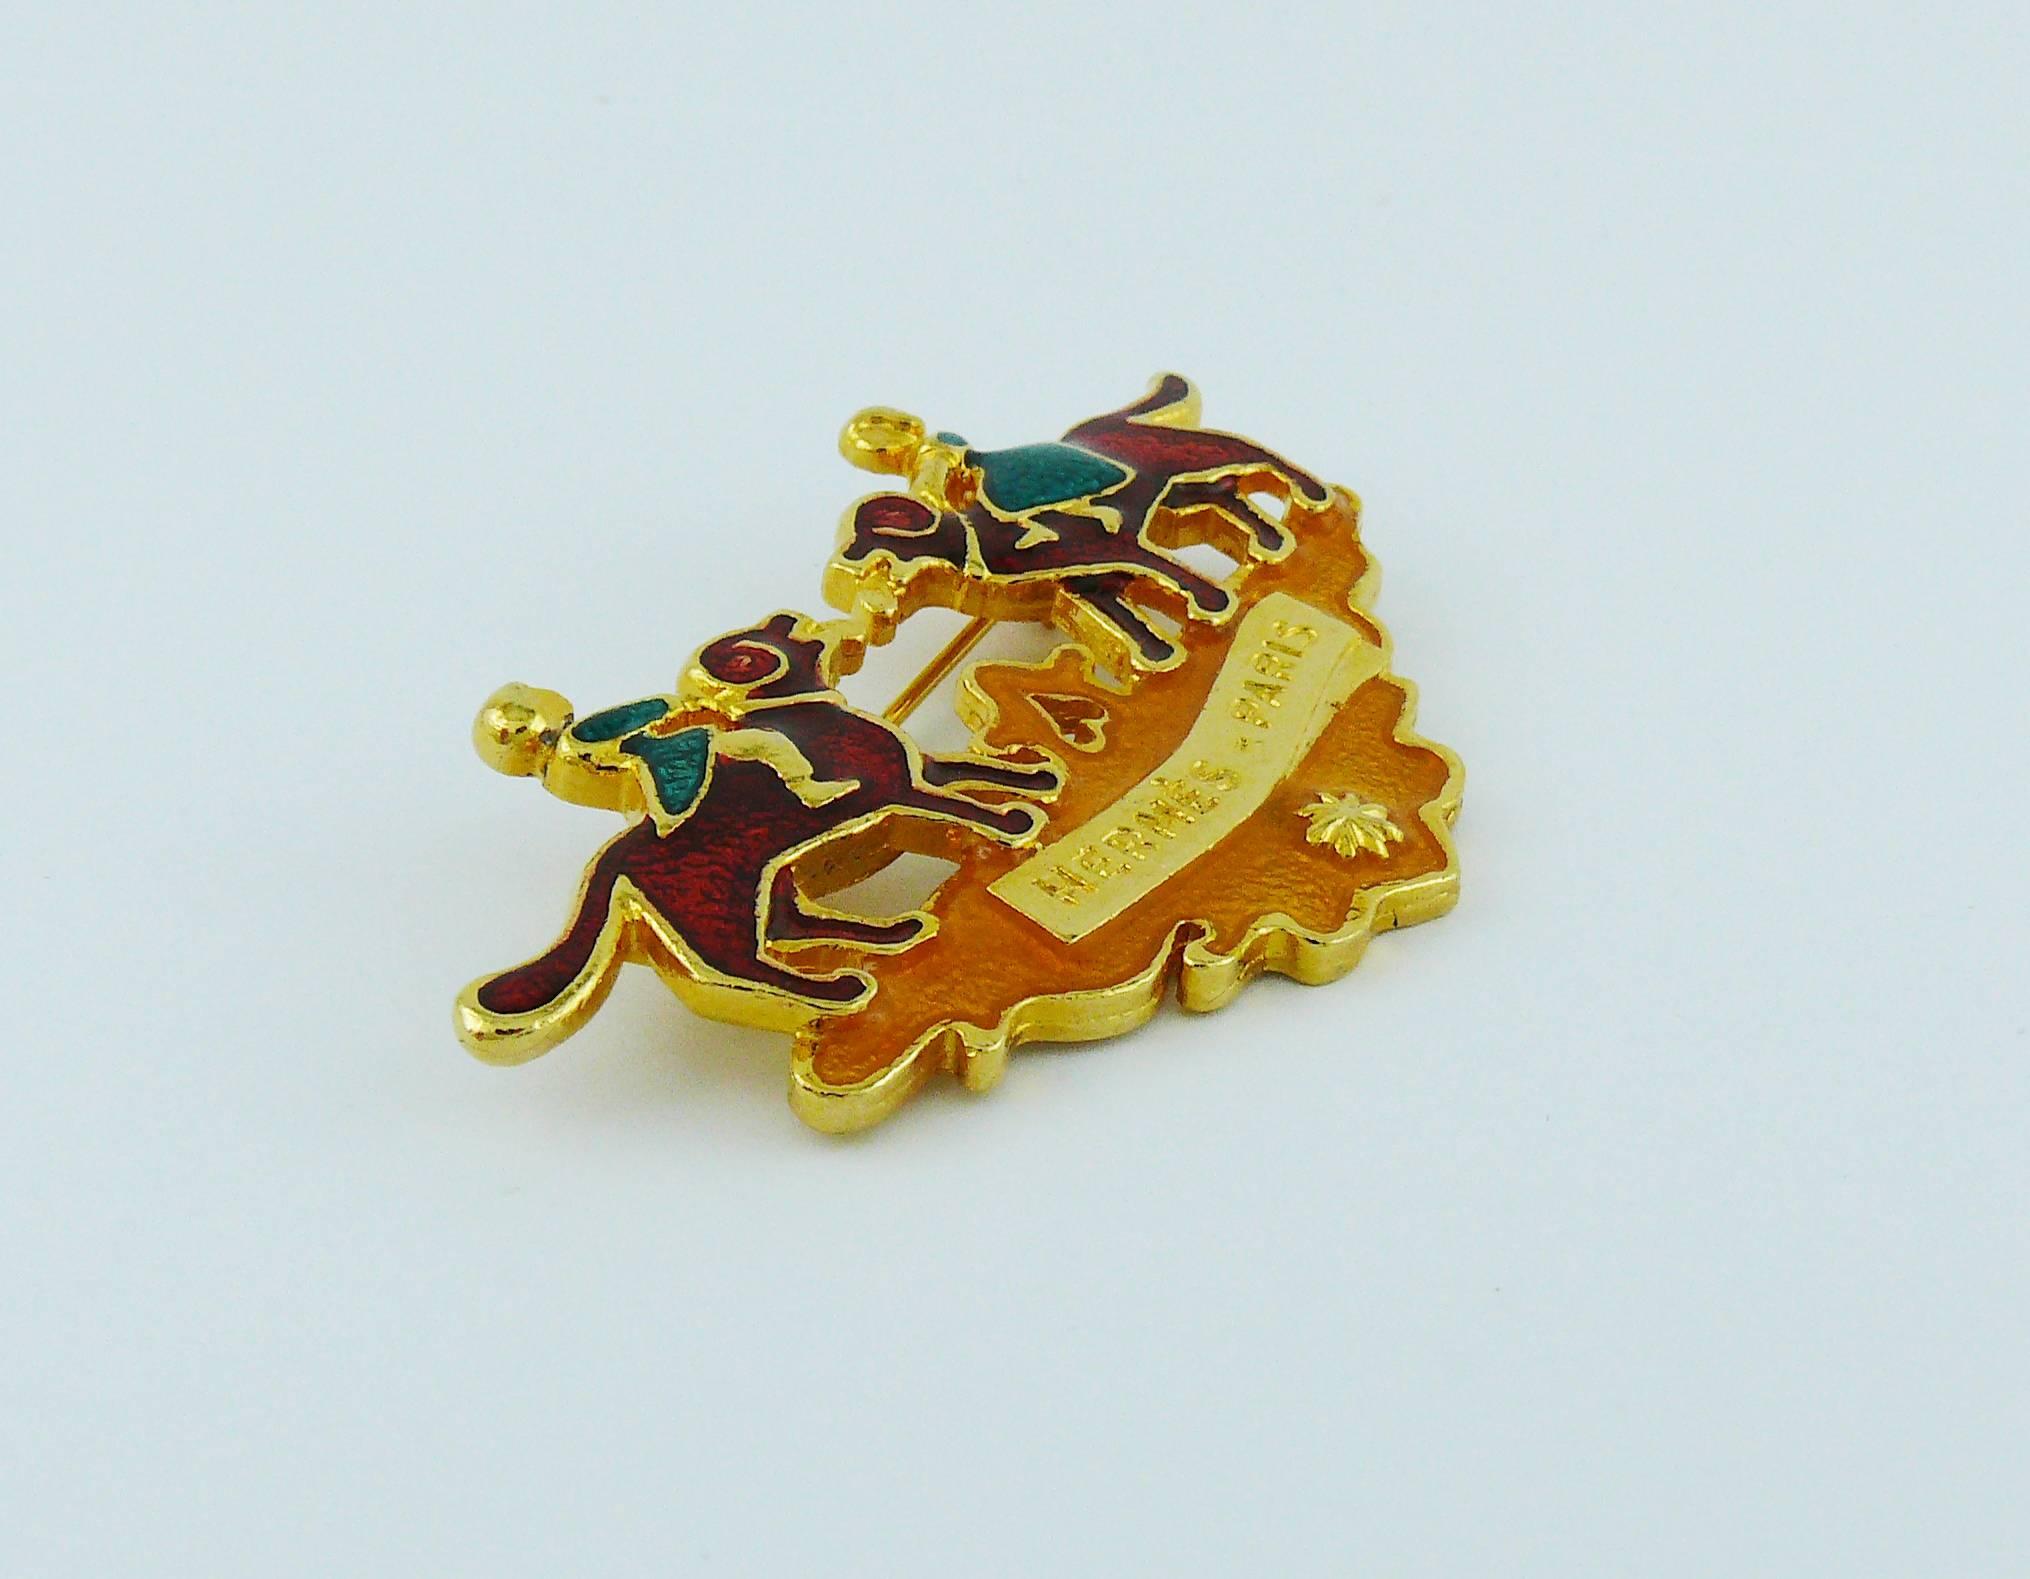 HERMES Paris gold toned brooch with multicolor enamel featuring children and dogs.

Embossed HERMES PARIS.

Indicative measurements : max. width approx. 6.2 cm (2.44 inches)/ height approx. 3.5 cm (1.38 inches).

JEWELRY CONDITION CHART
- New or